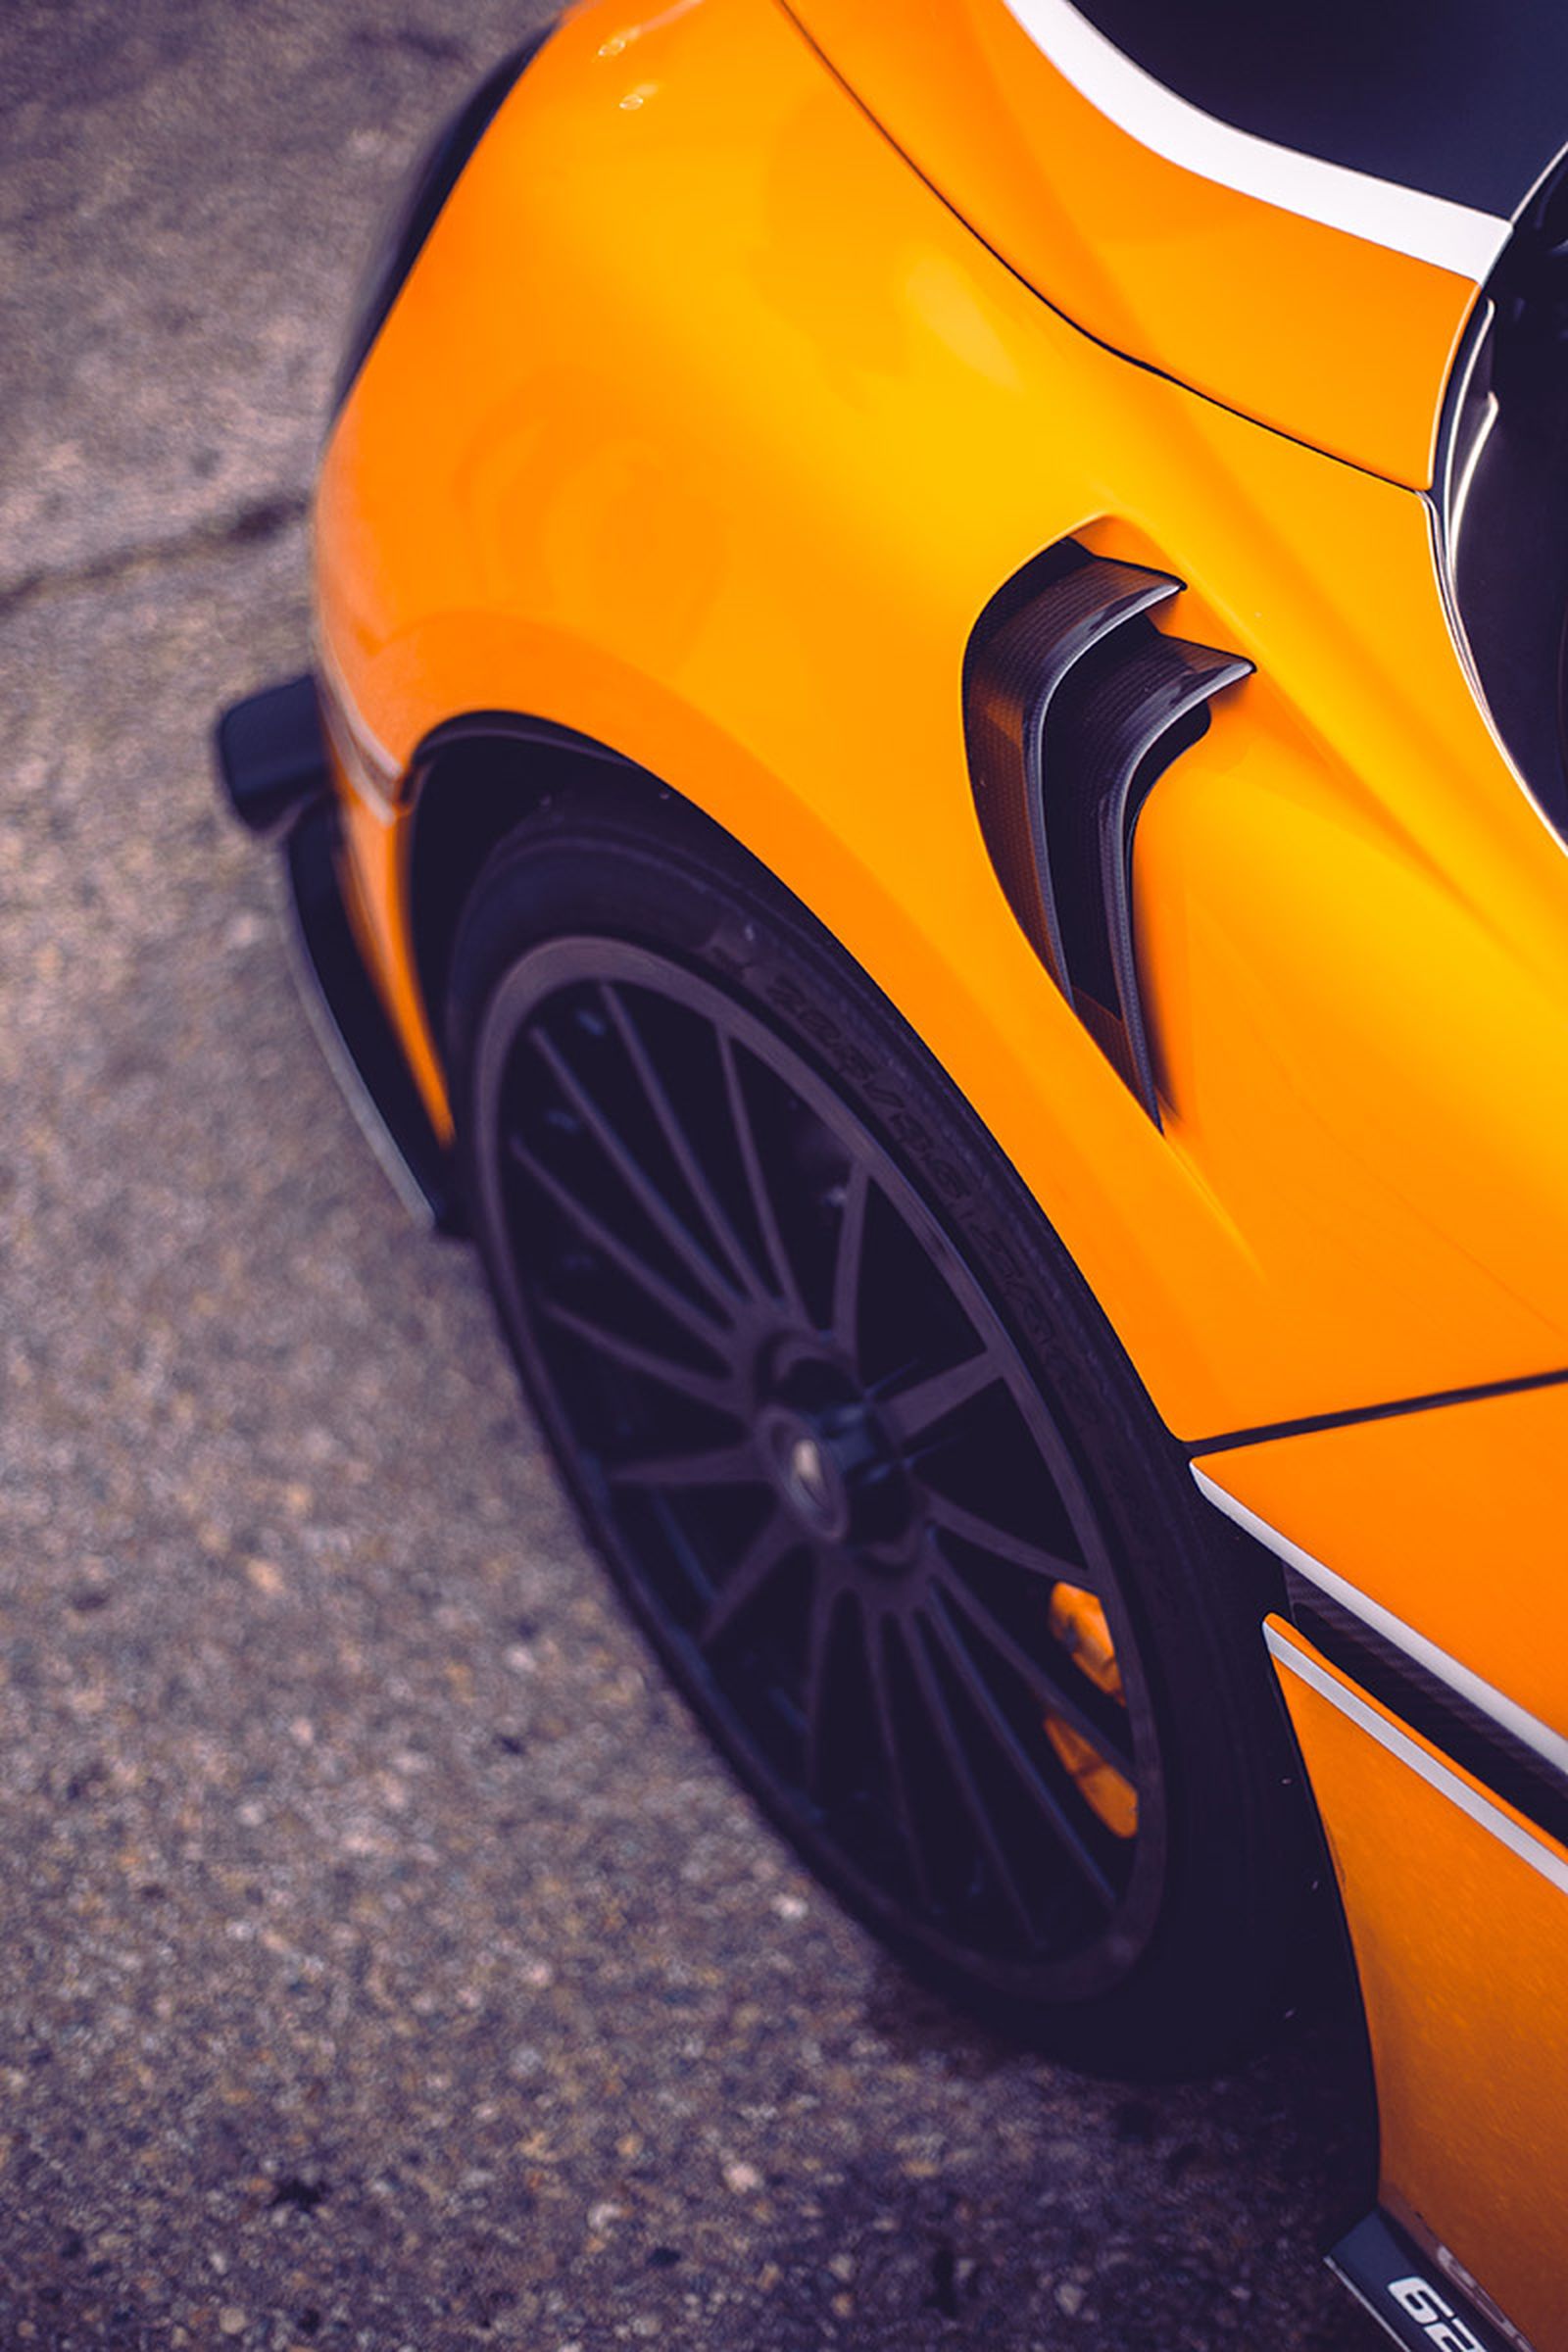 In addition to the standard centerlock wheels with Pirelli Trofeo R semi-slick tires, optional full slick tires are offered, developed bespoke for the 620R 
between Pirelli and McLaren motorsports teams.